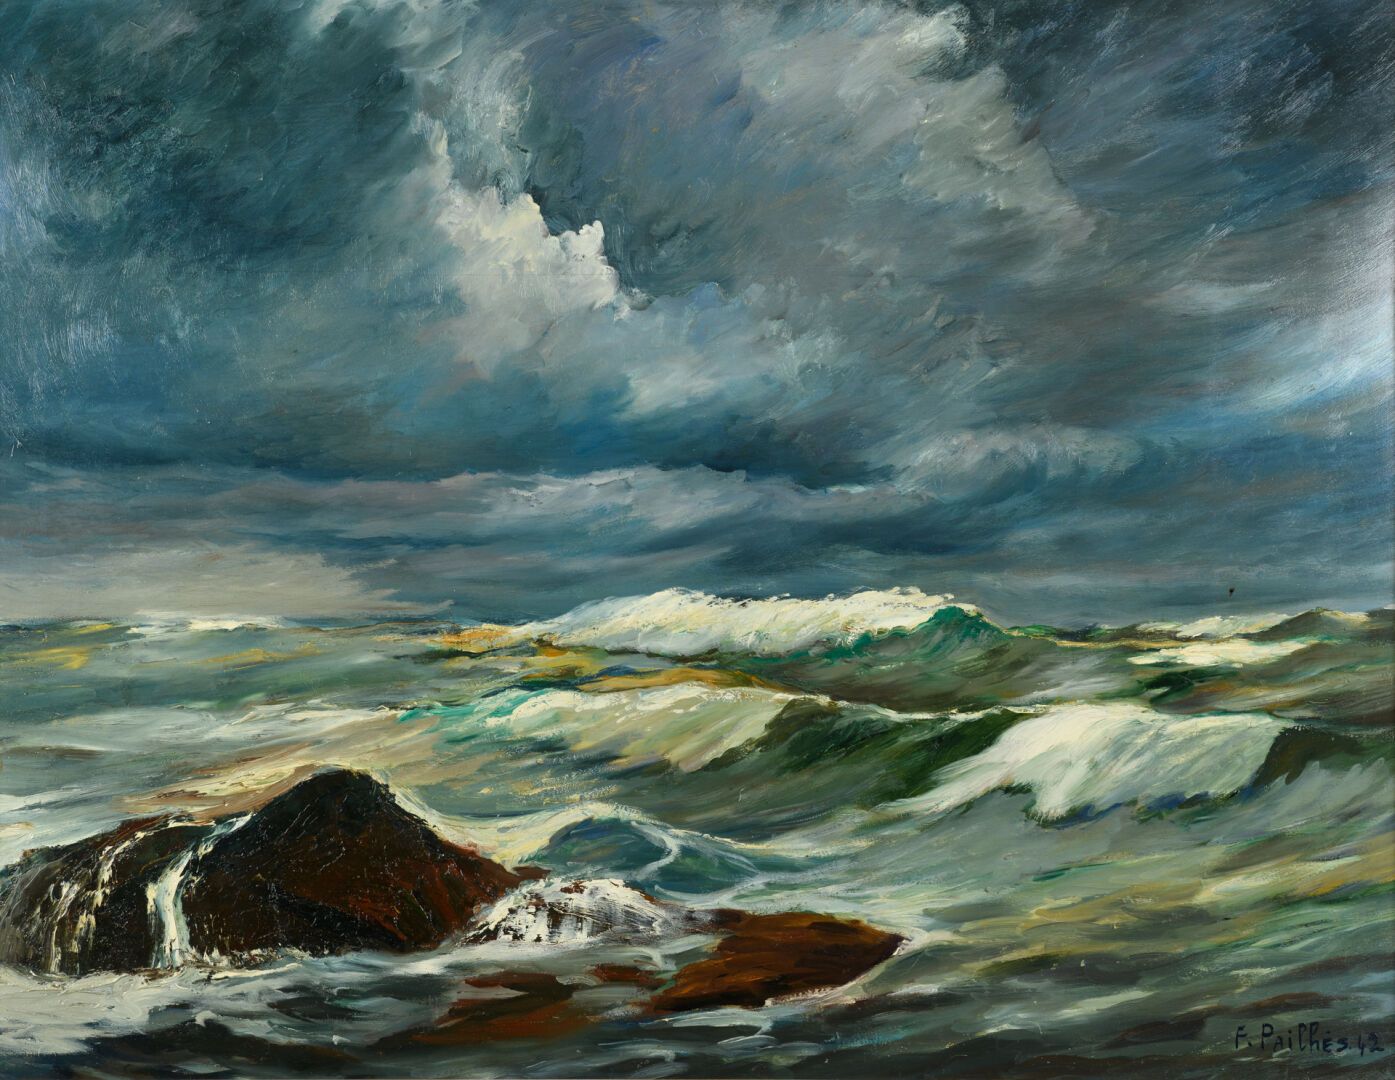 Null Fred PAILHES 1902-1991 "Tempesta in mare" HSP, SBD, datato 1942, 70x90cm